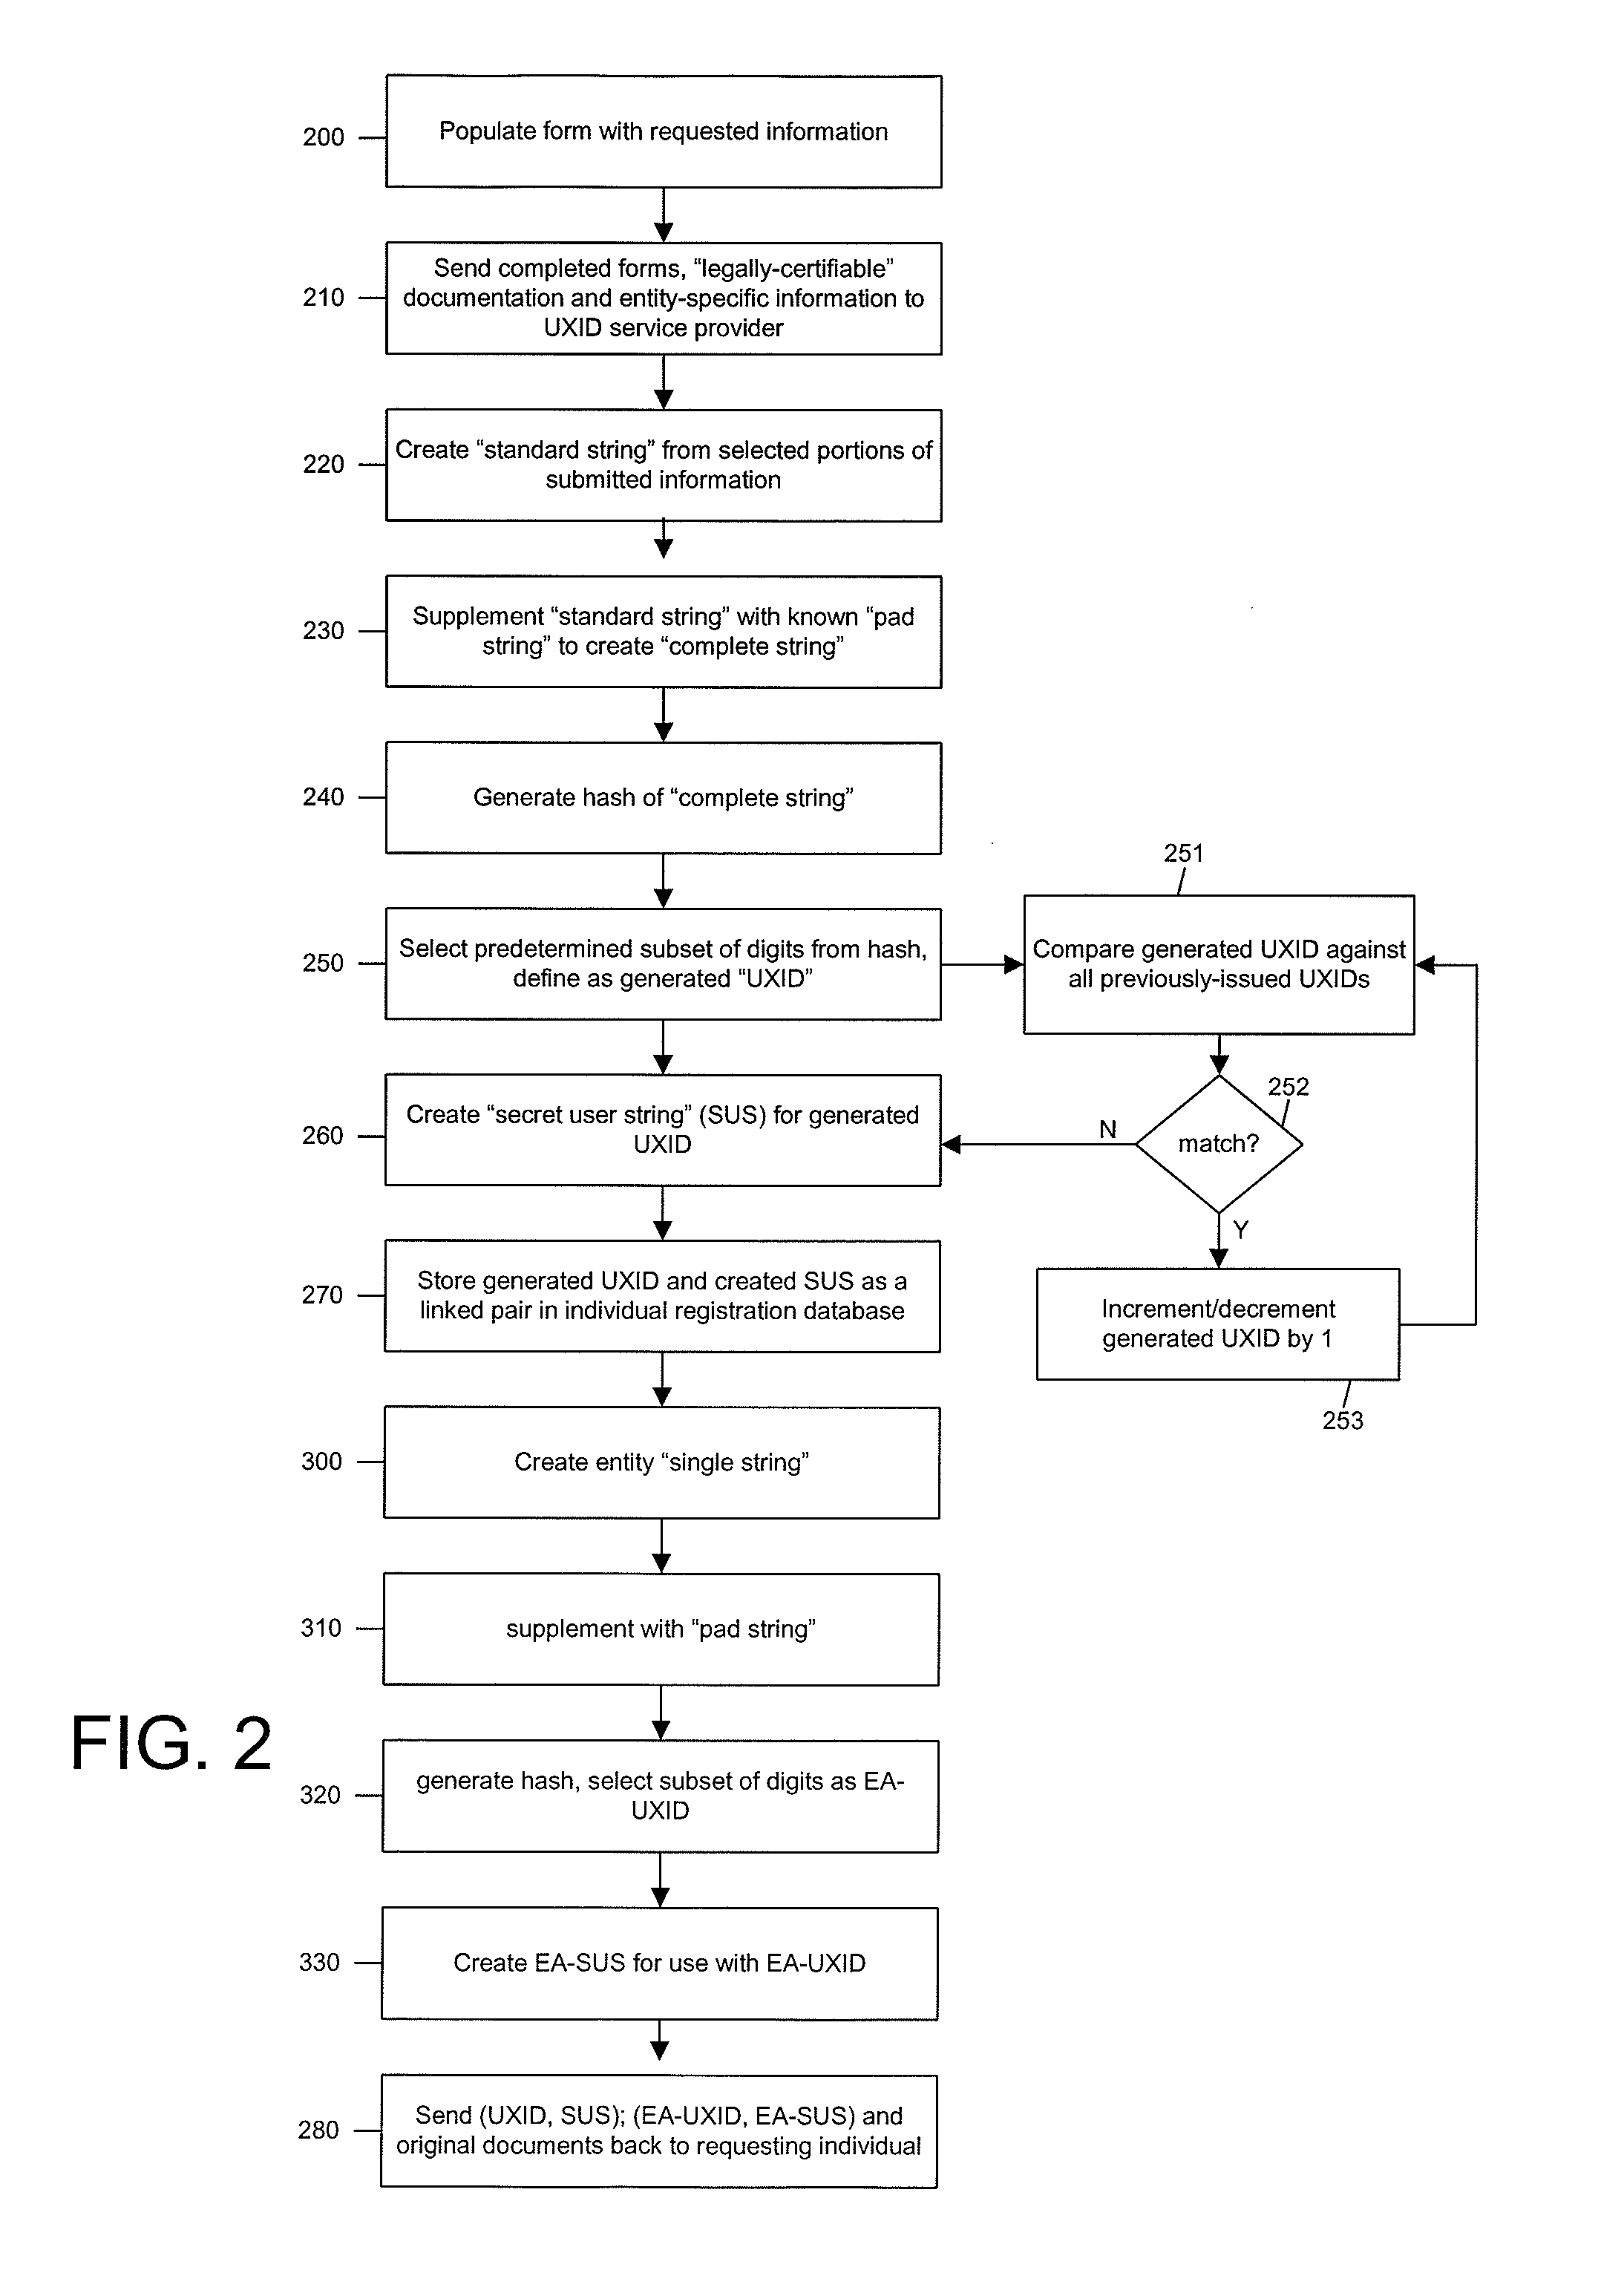 Systems and methods for controlling data access by use of a universal anonymous identifier